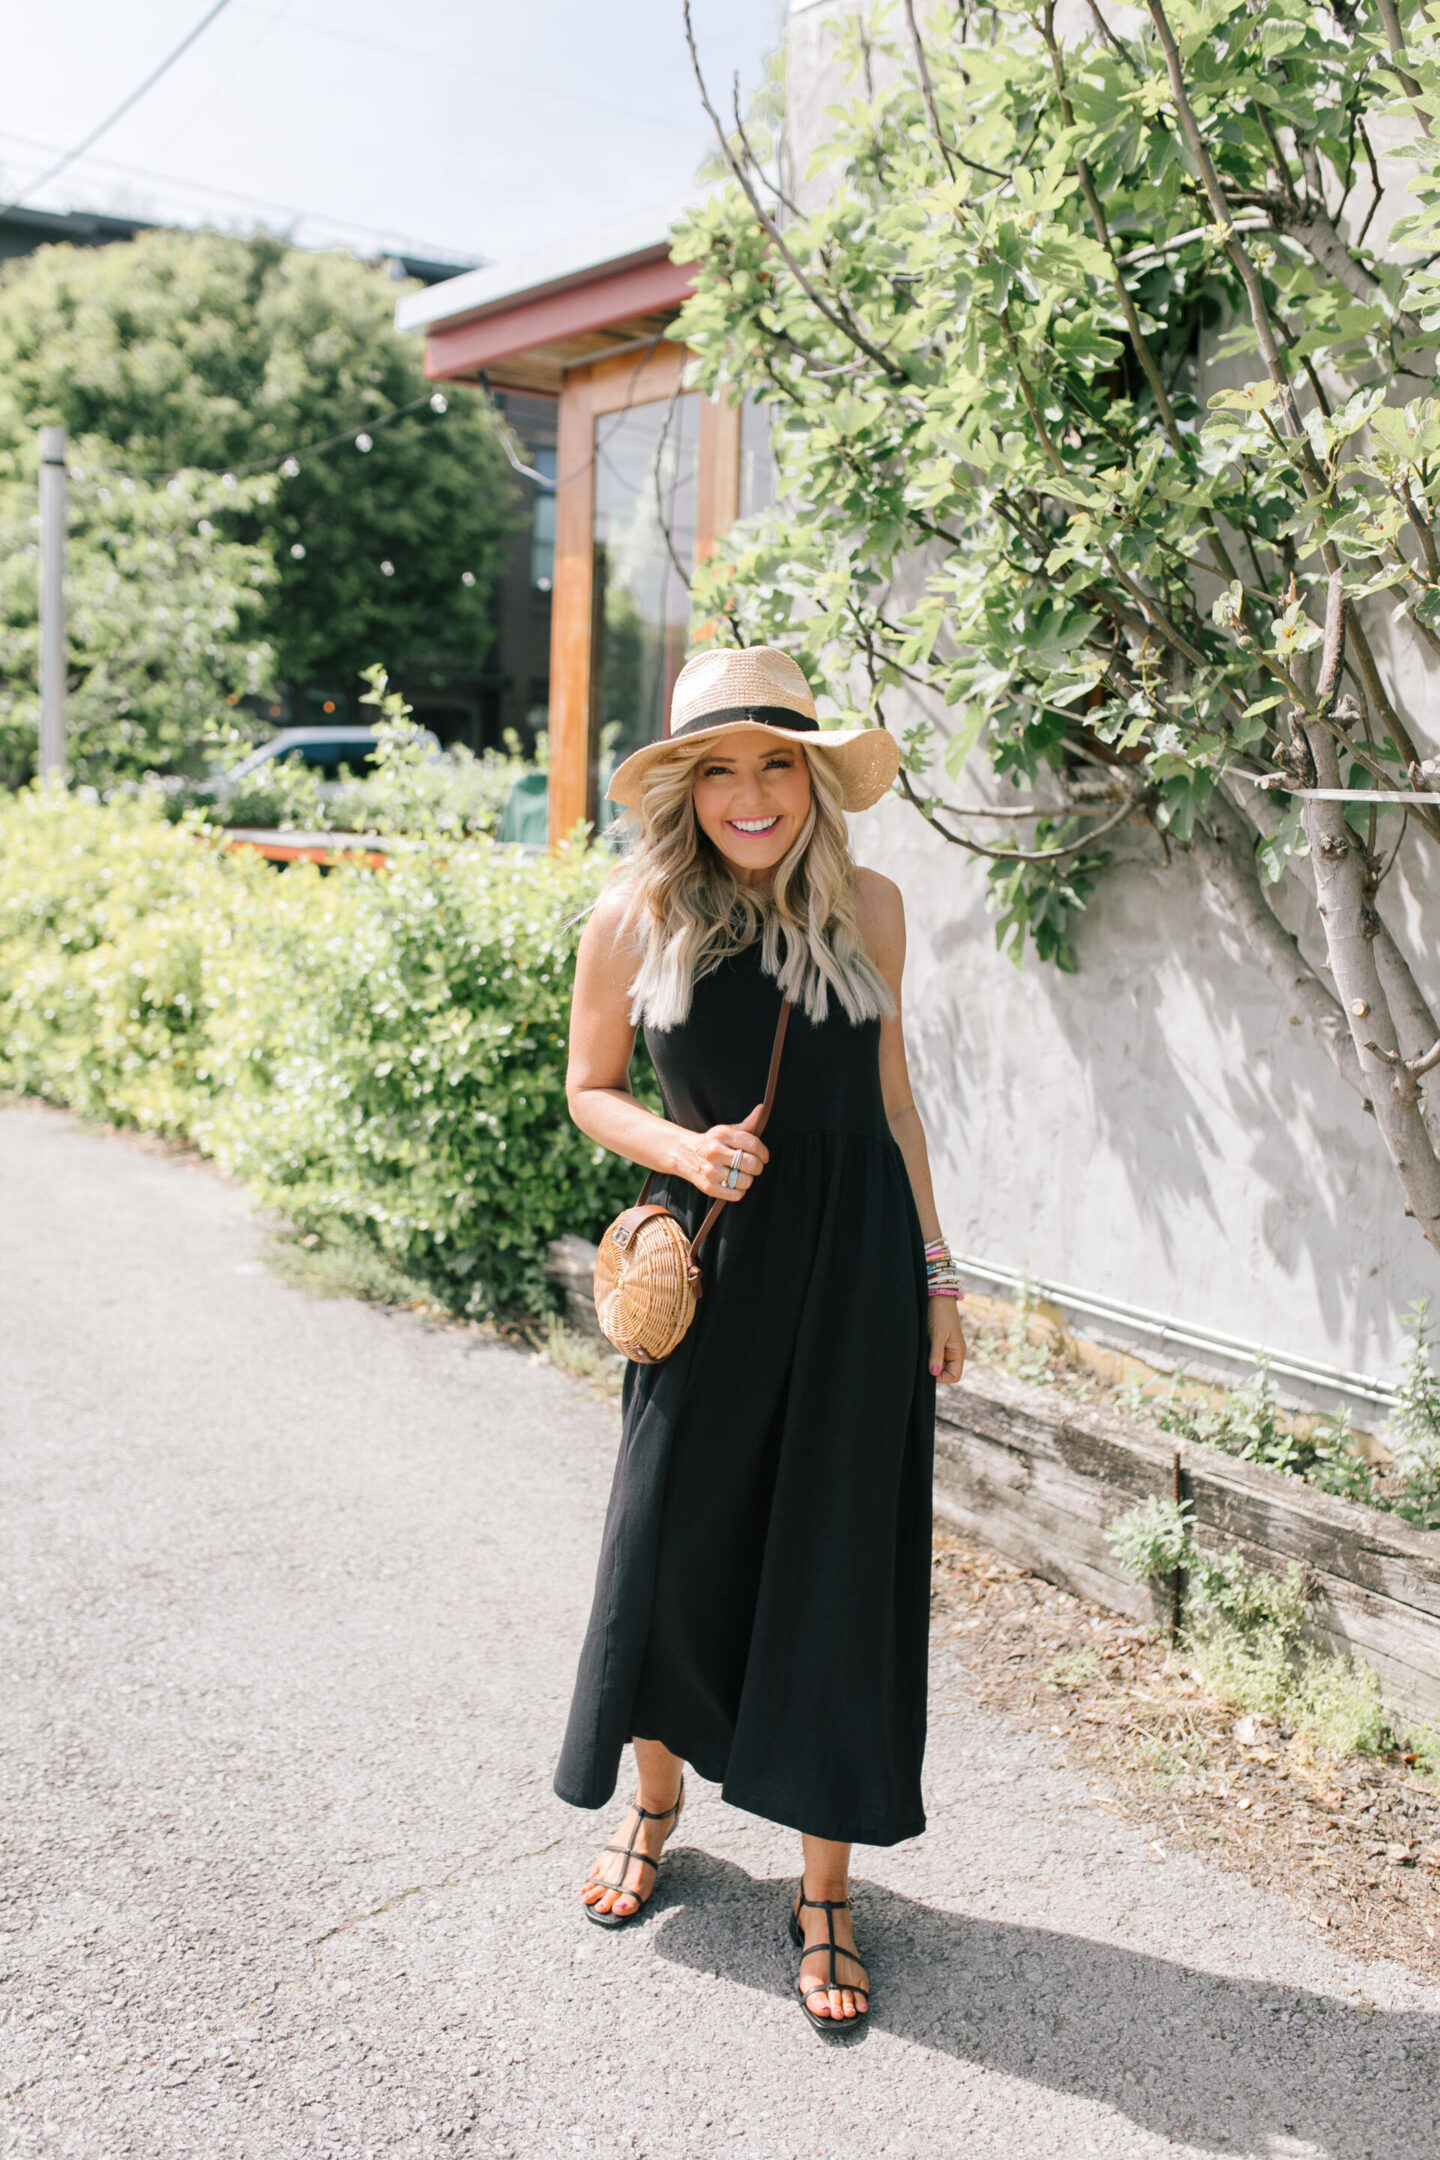 J Crew Clothing by popular Nashville fashion blog, Hello Happiness: image of a woman wearing a black J. Crew sleeveless maxi dress with black strap sandals and a straw sun hat. 